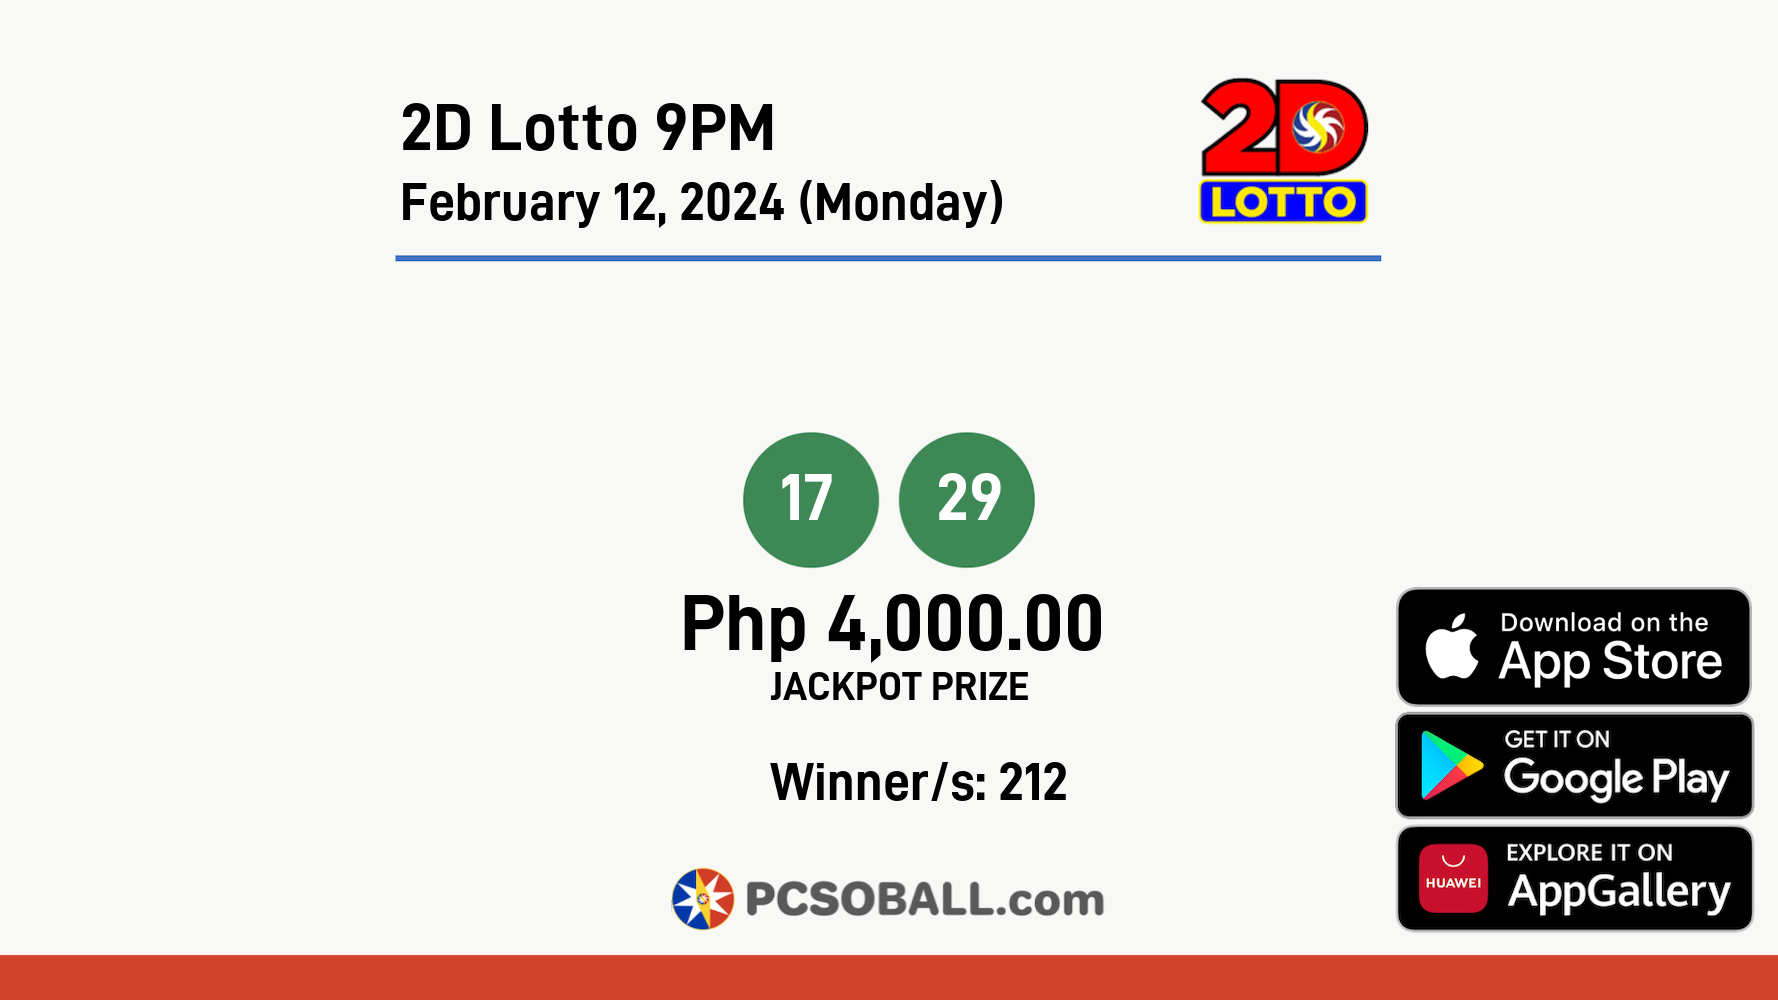 2D Lotto 9PM February 12, 2024 (Monday) Result